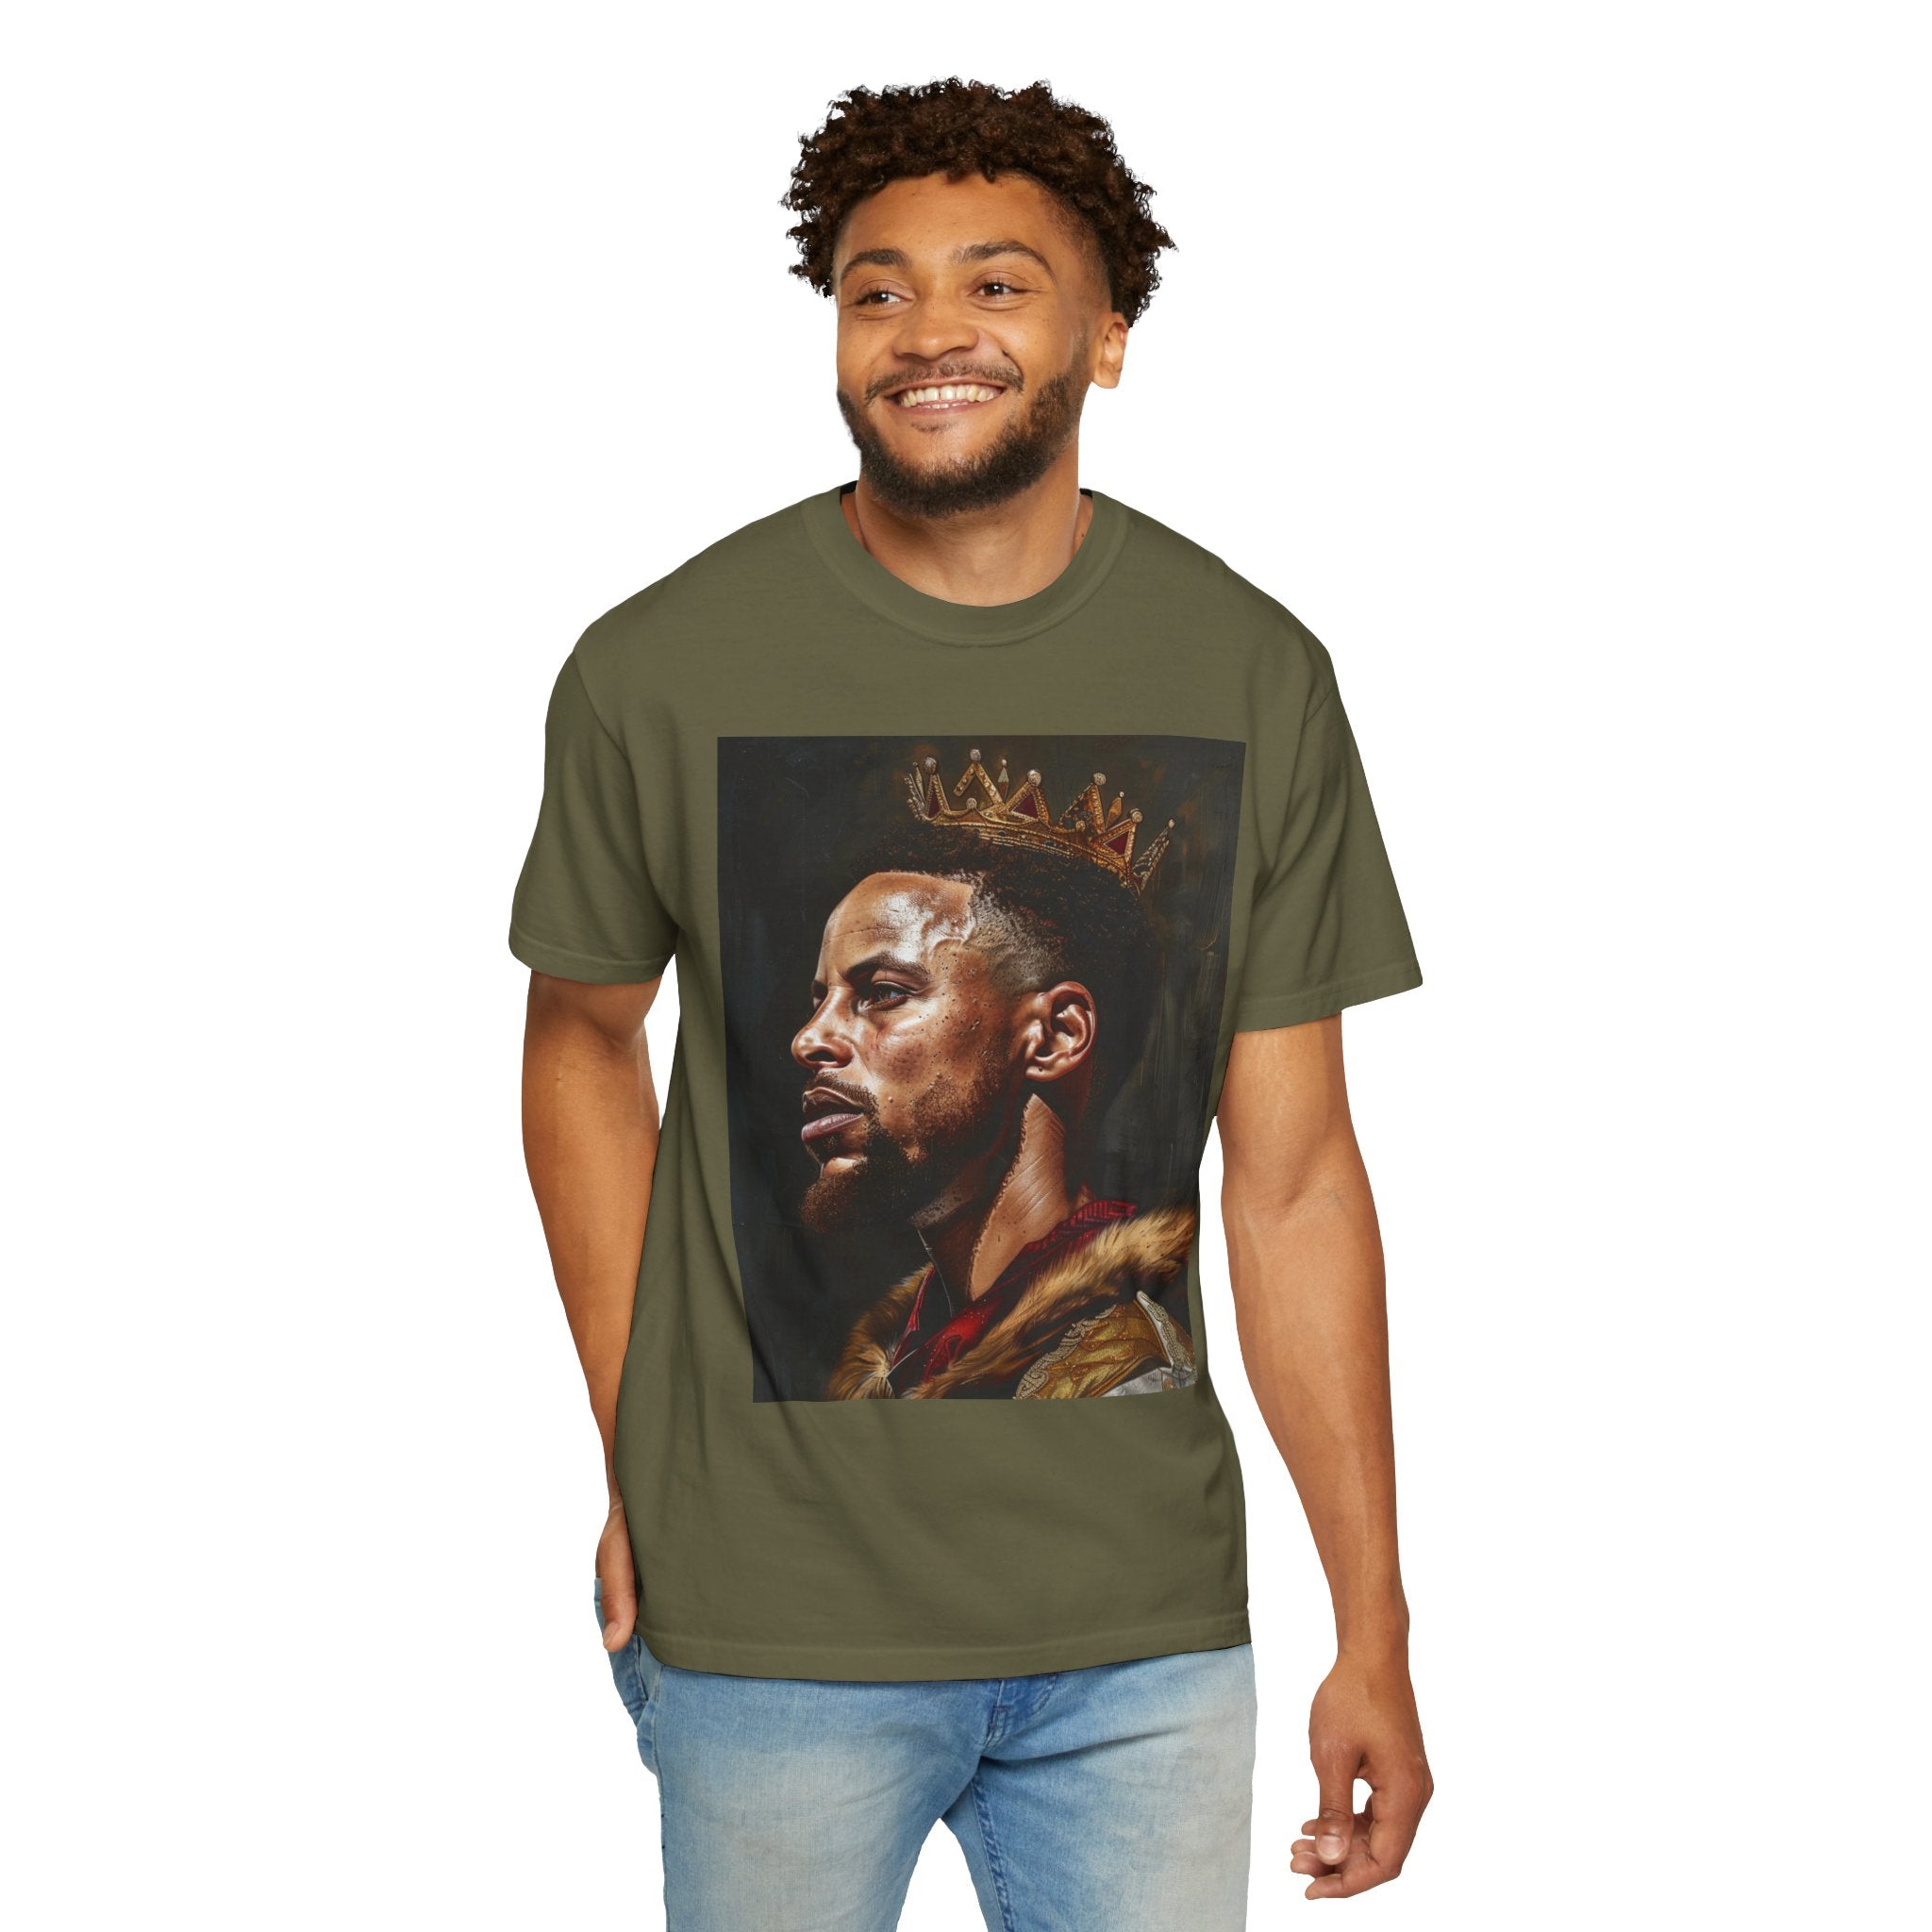 Court Classics: King Steph Renaissance Masterpiece Unisex Garment-Dyed T-Shirt - A Tribute to Basketball Royalty